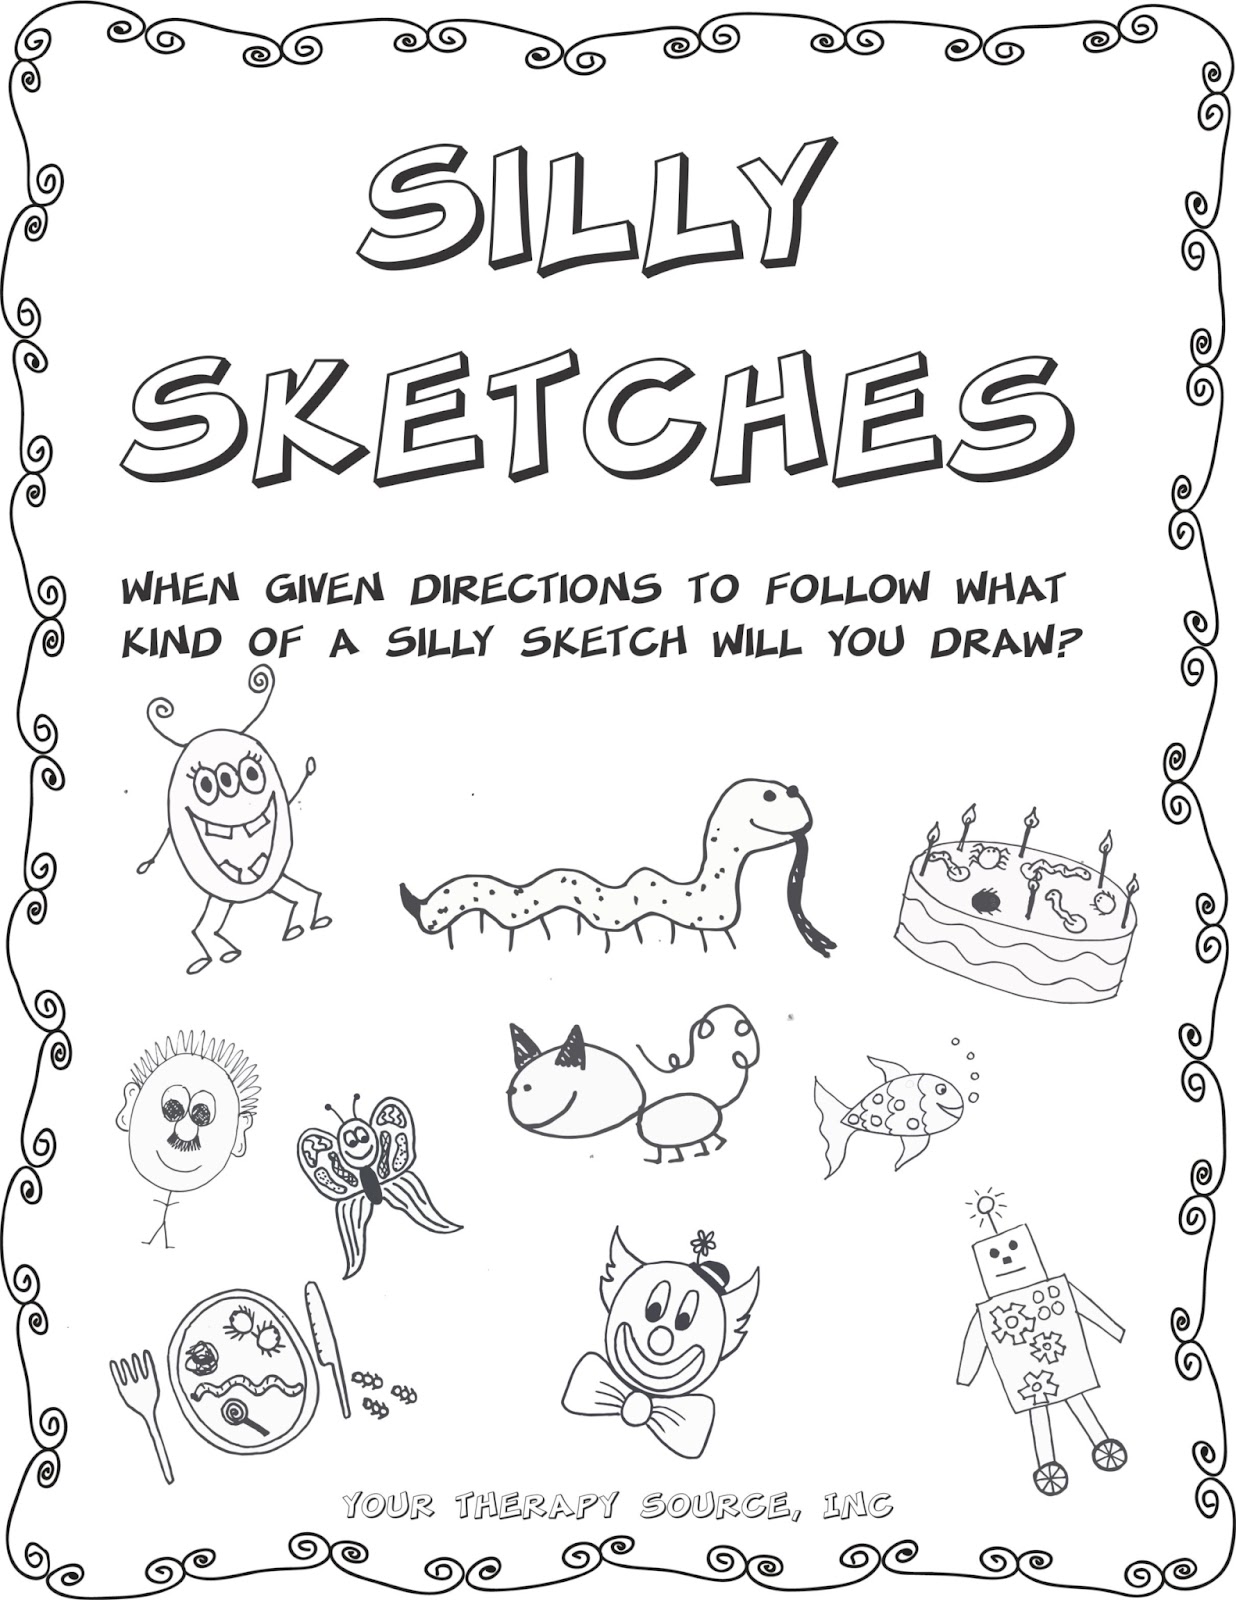 sillysketches-scaled.jpg